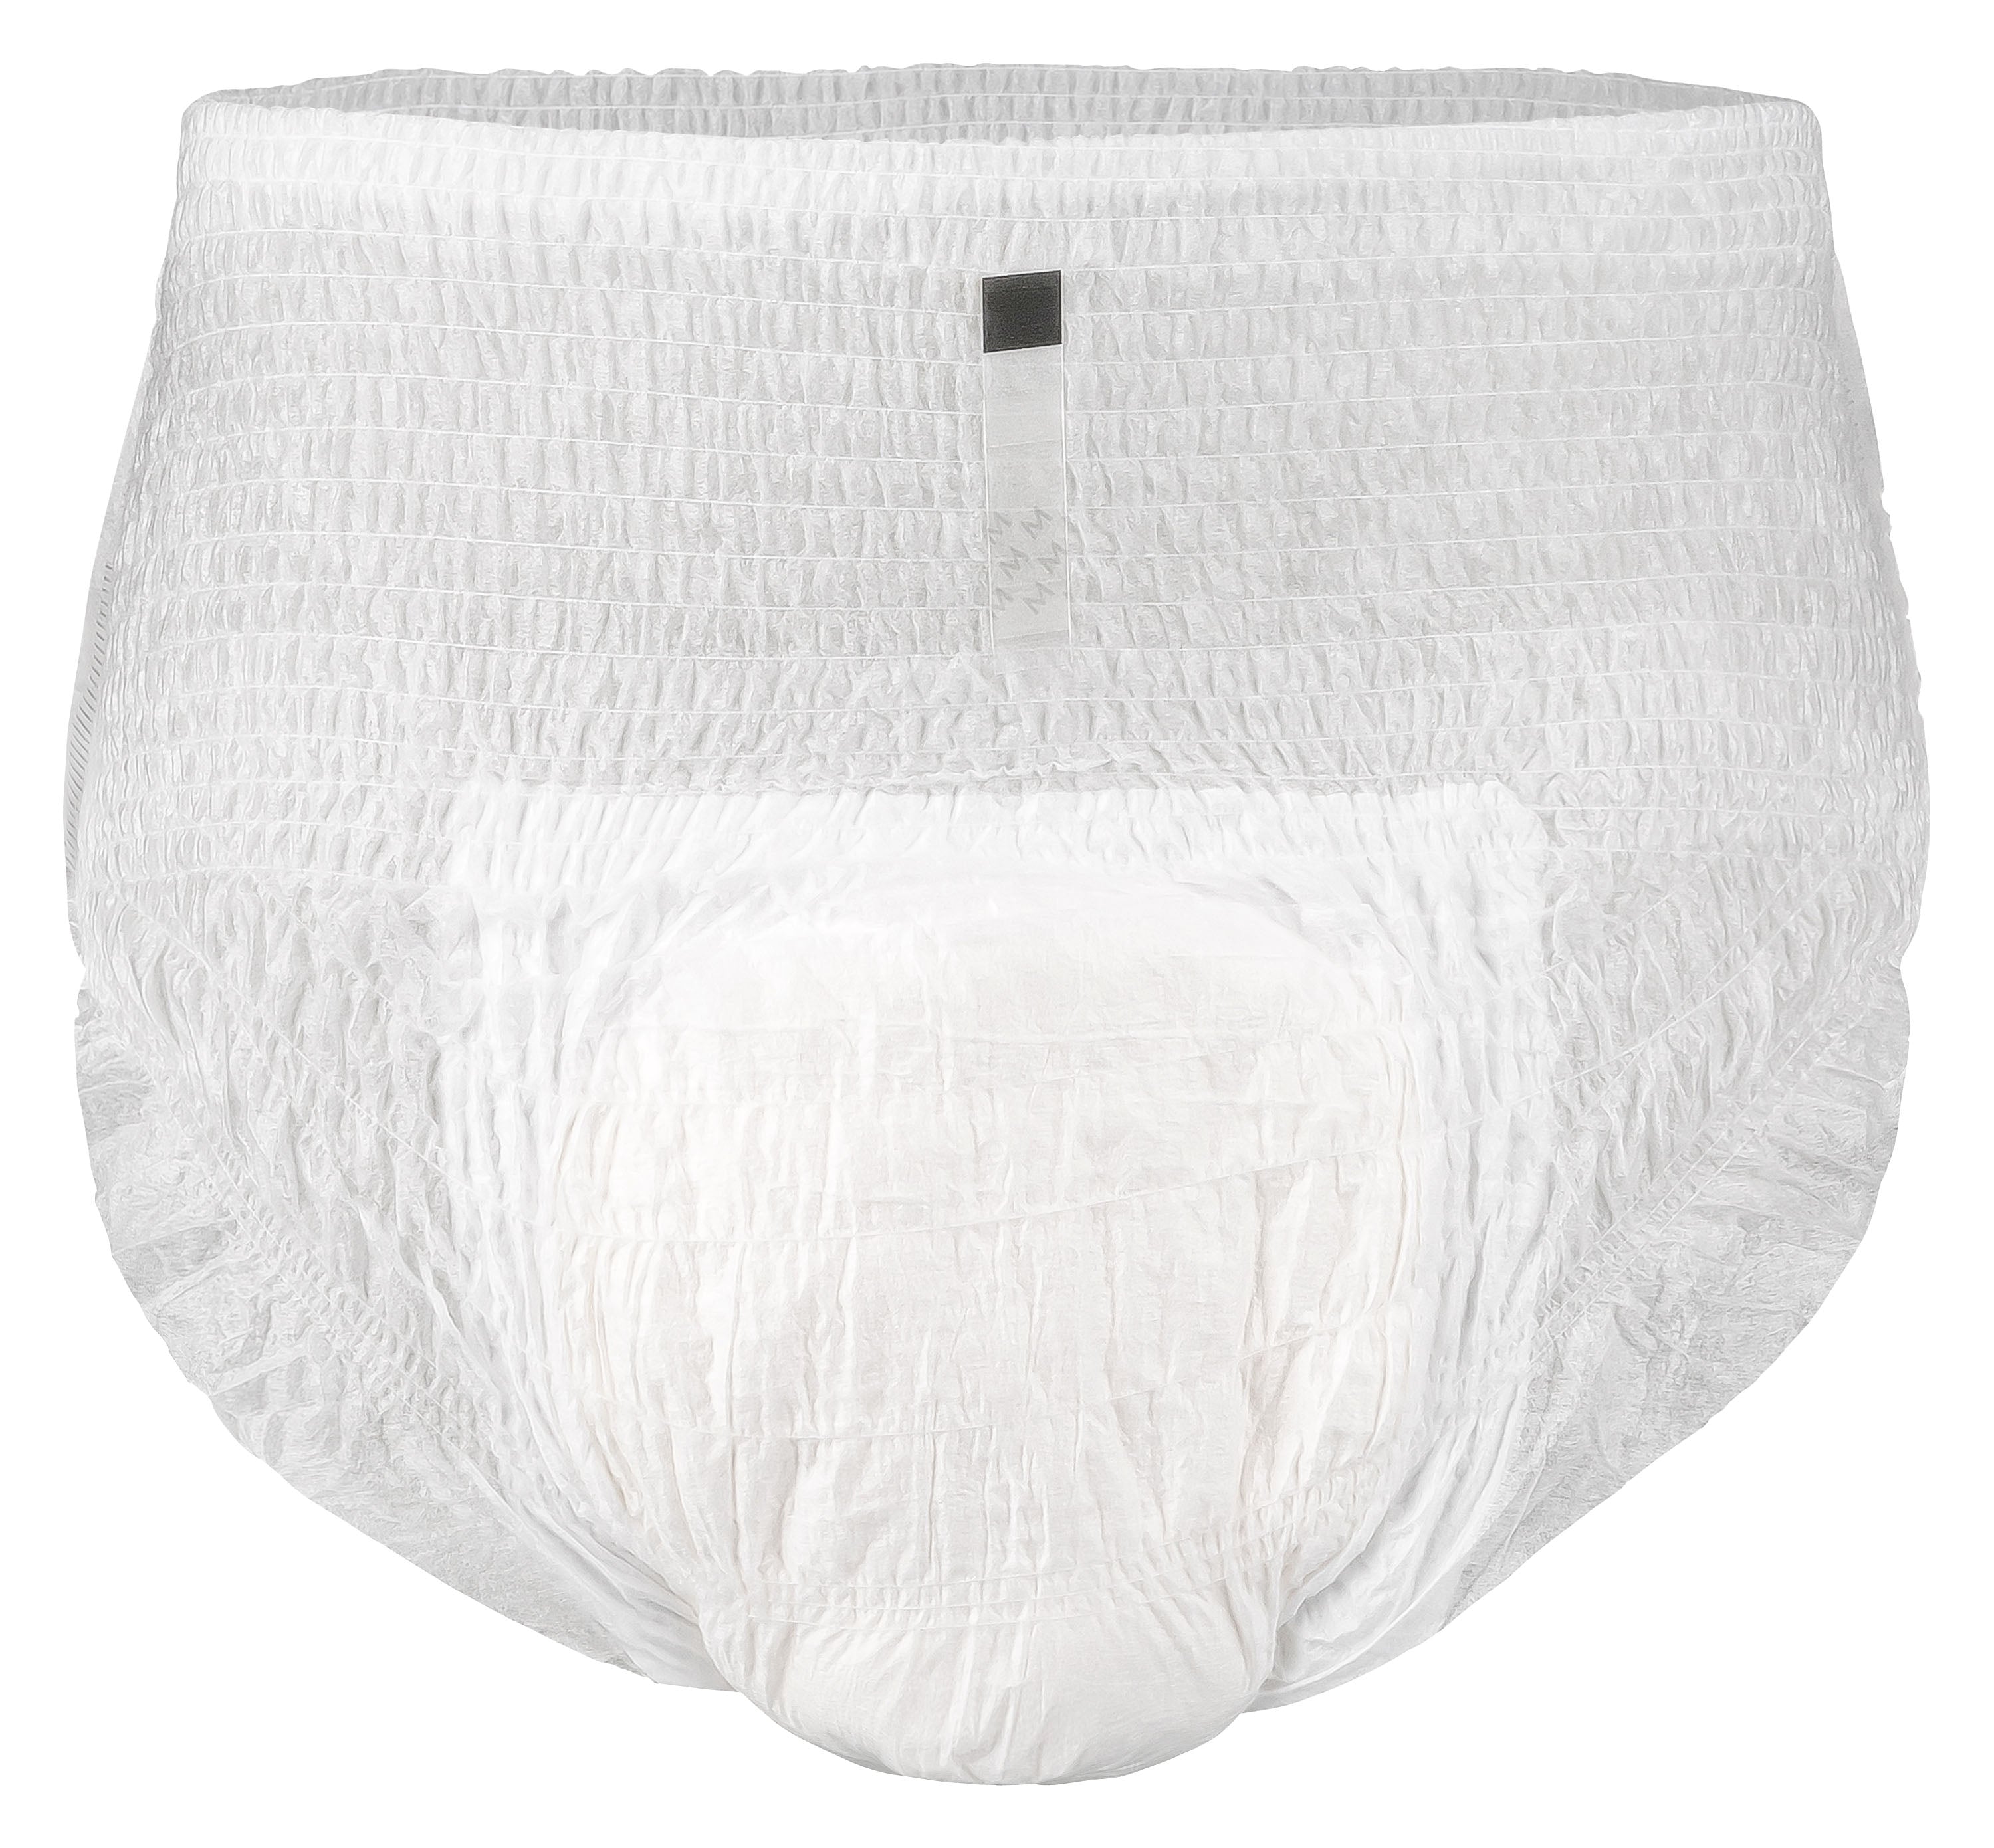 BetterDry 8 Pull-On Adult Diapers